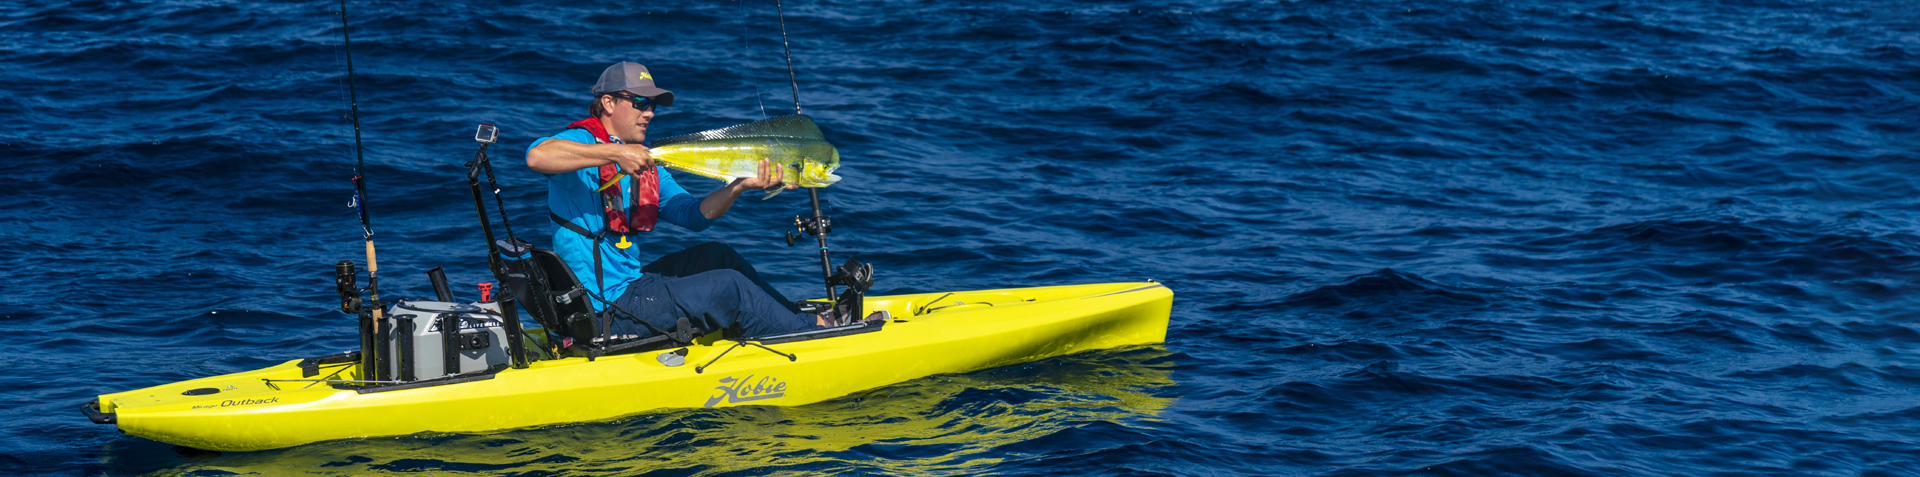 Kayaks: Mirage Outback by Hobie - Image 2692